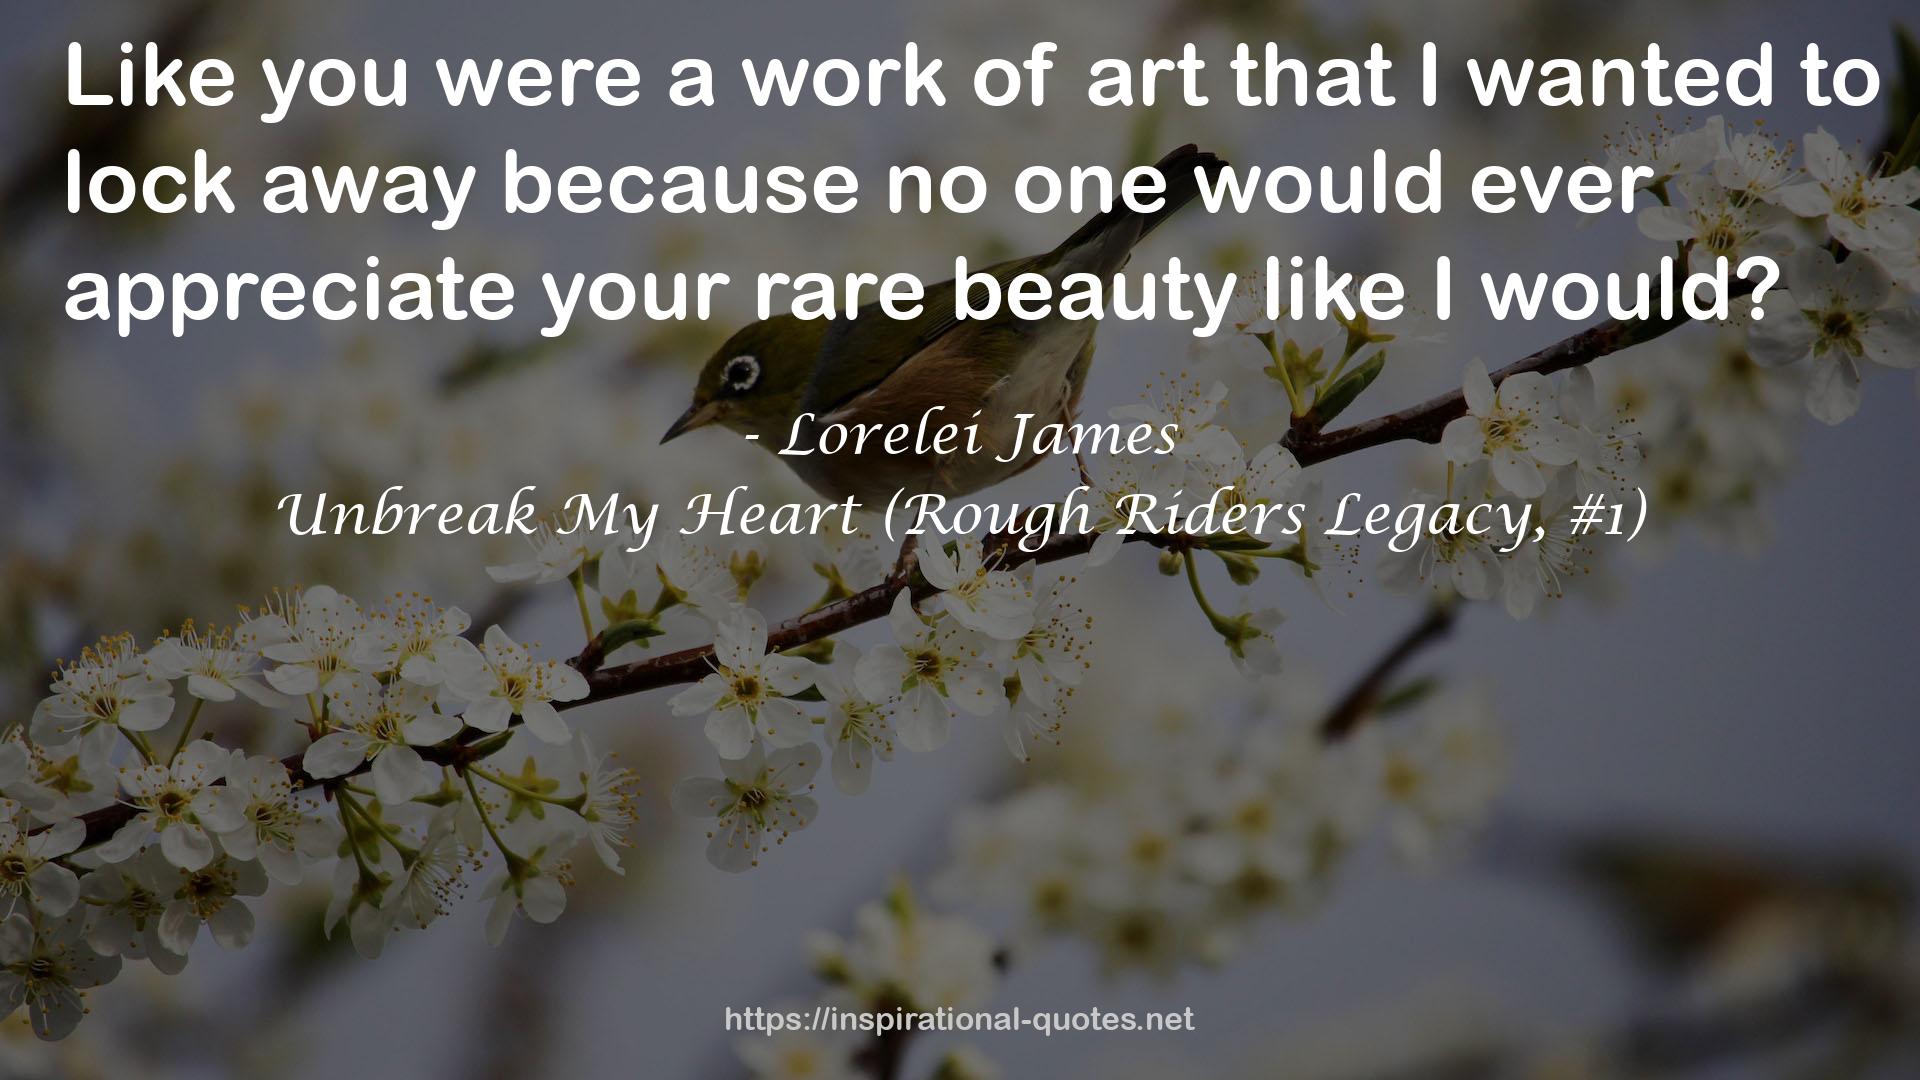 Unbreak My Heart (Rough Riders Legacy, #1) QUOTES